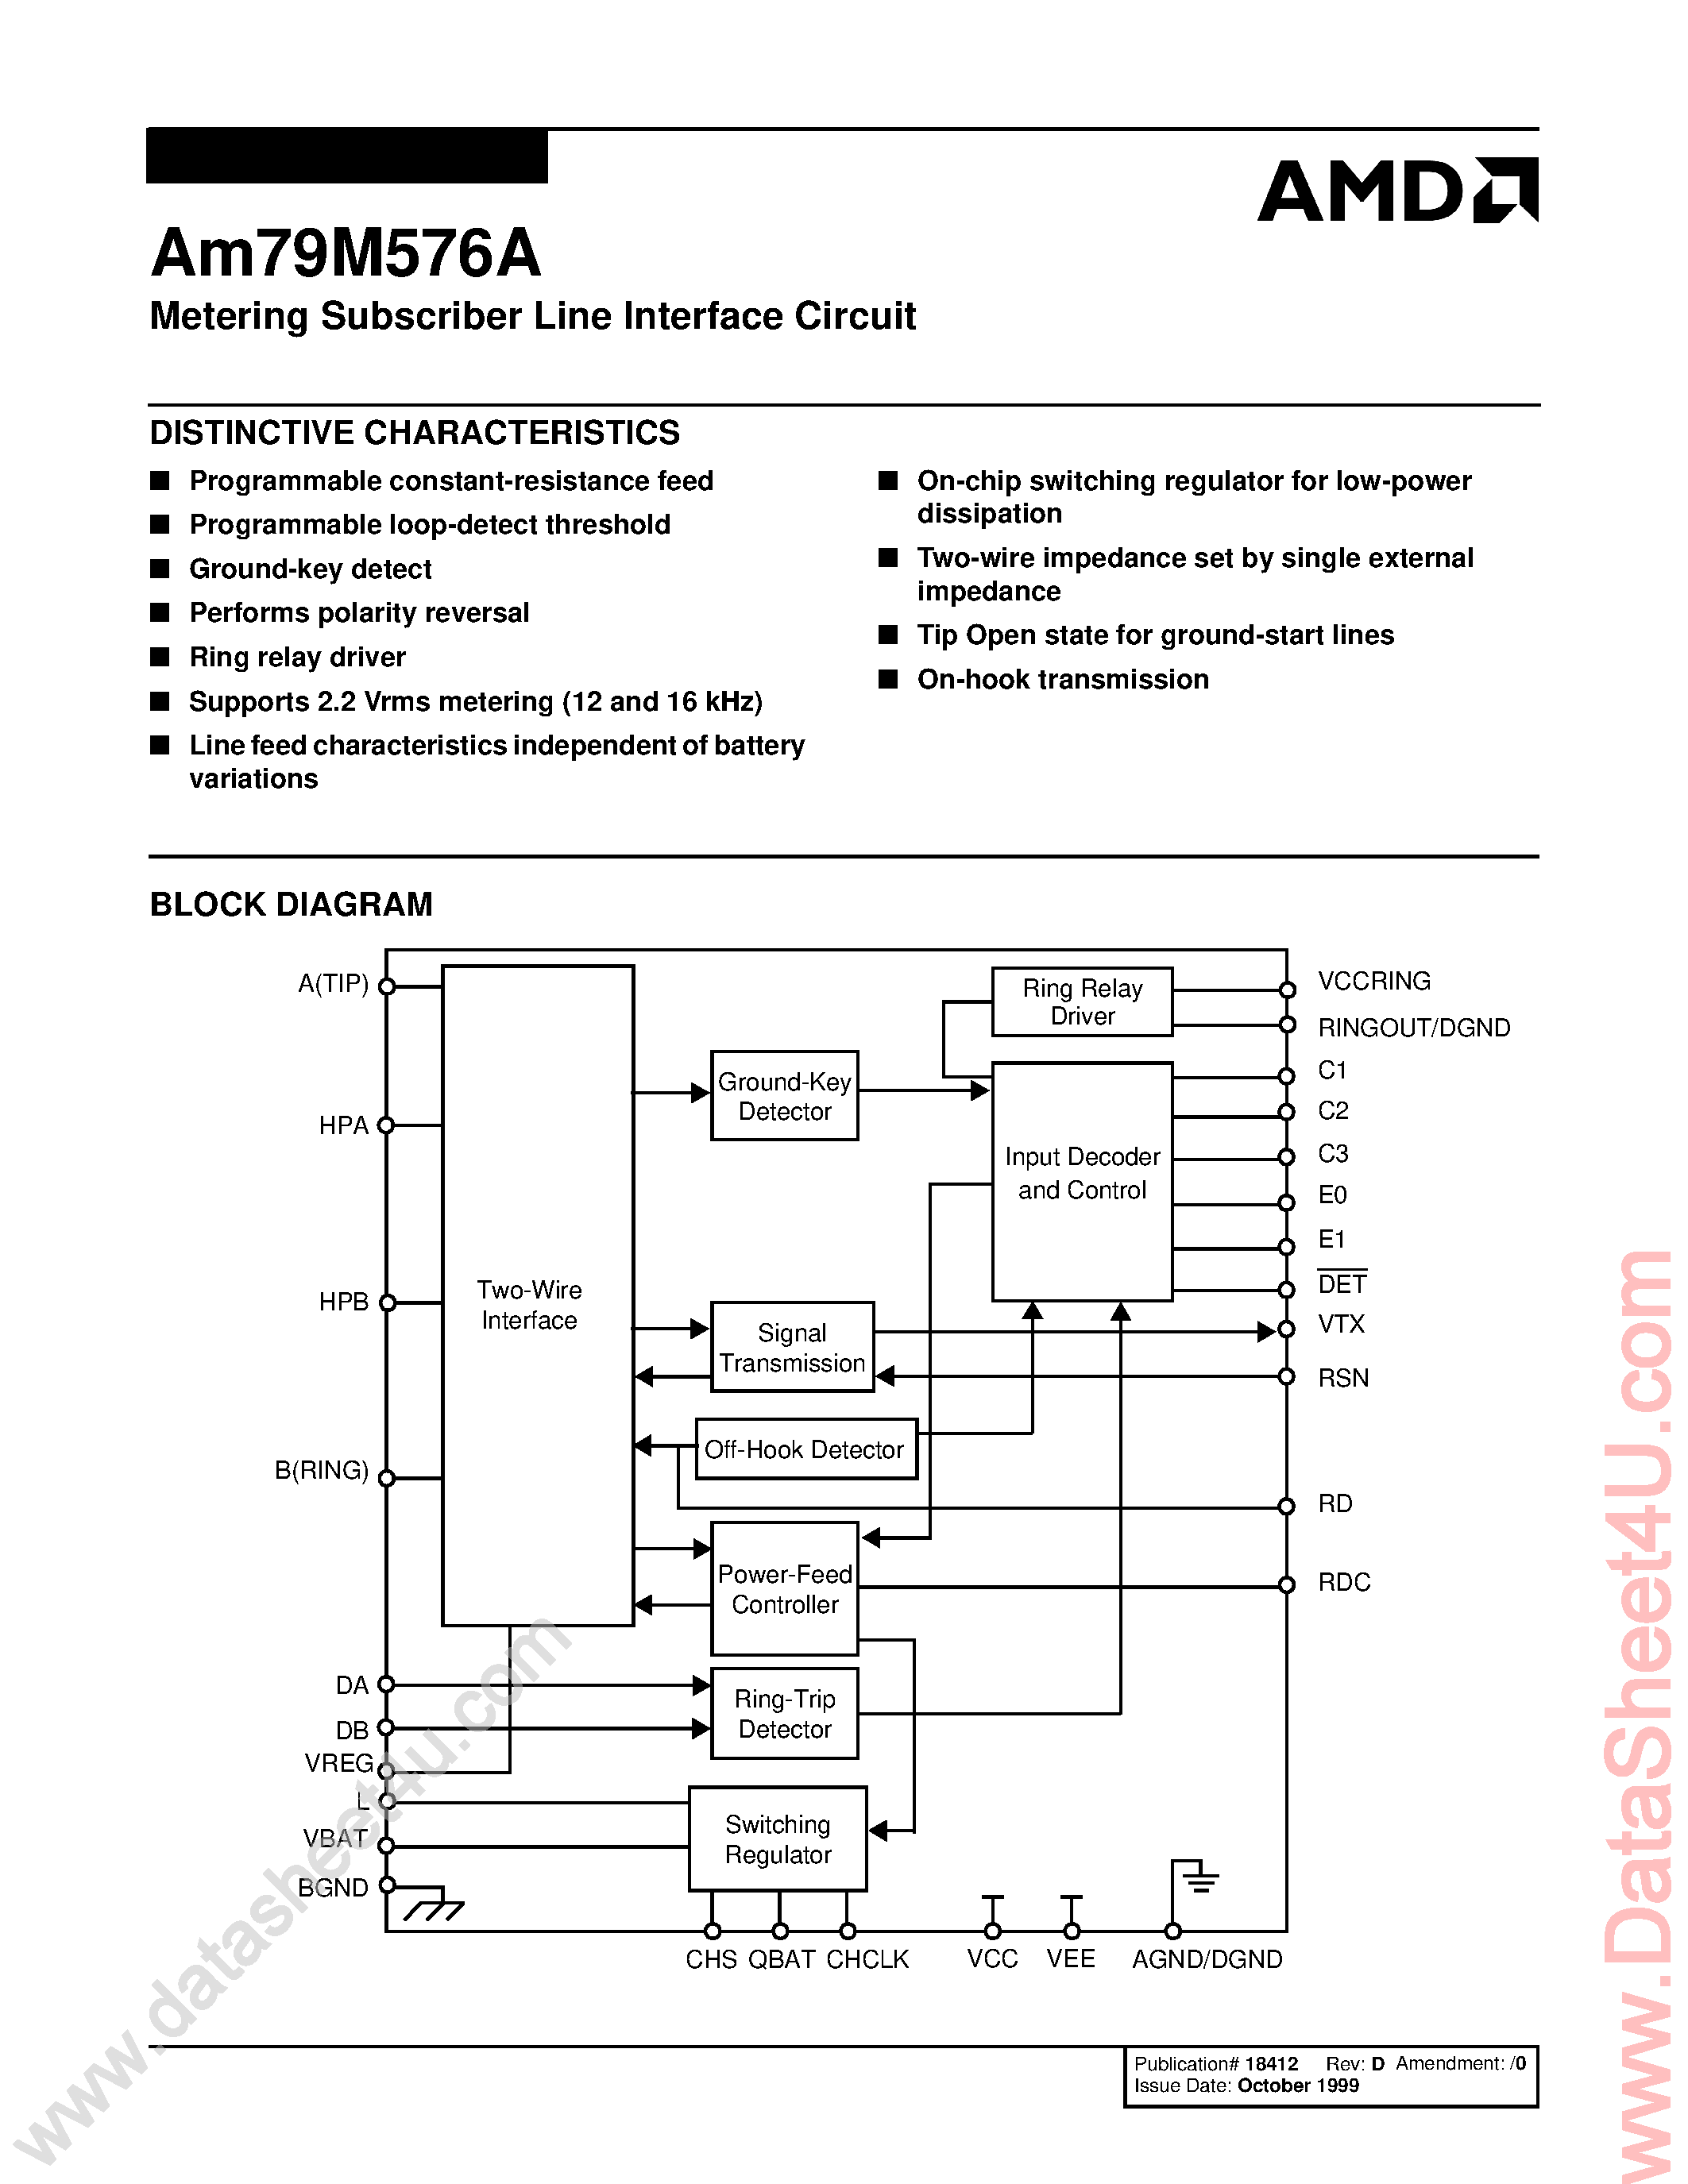 Даташит AM79M576A - Metering Subscriber Line Interface Circuit страница 1